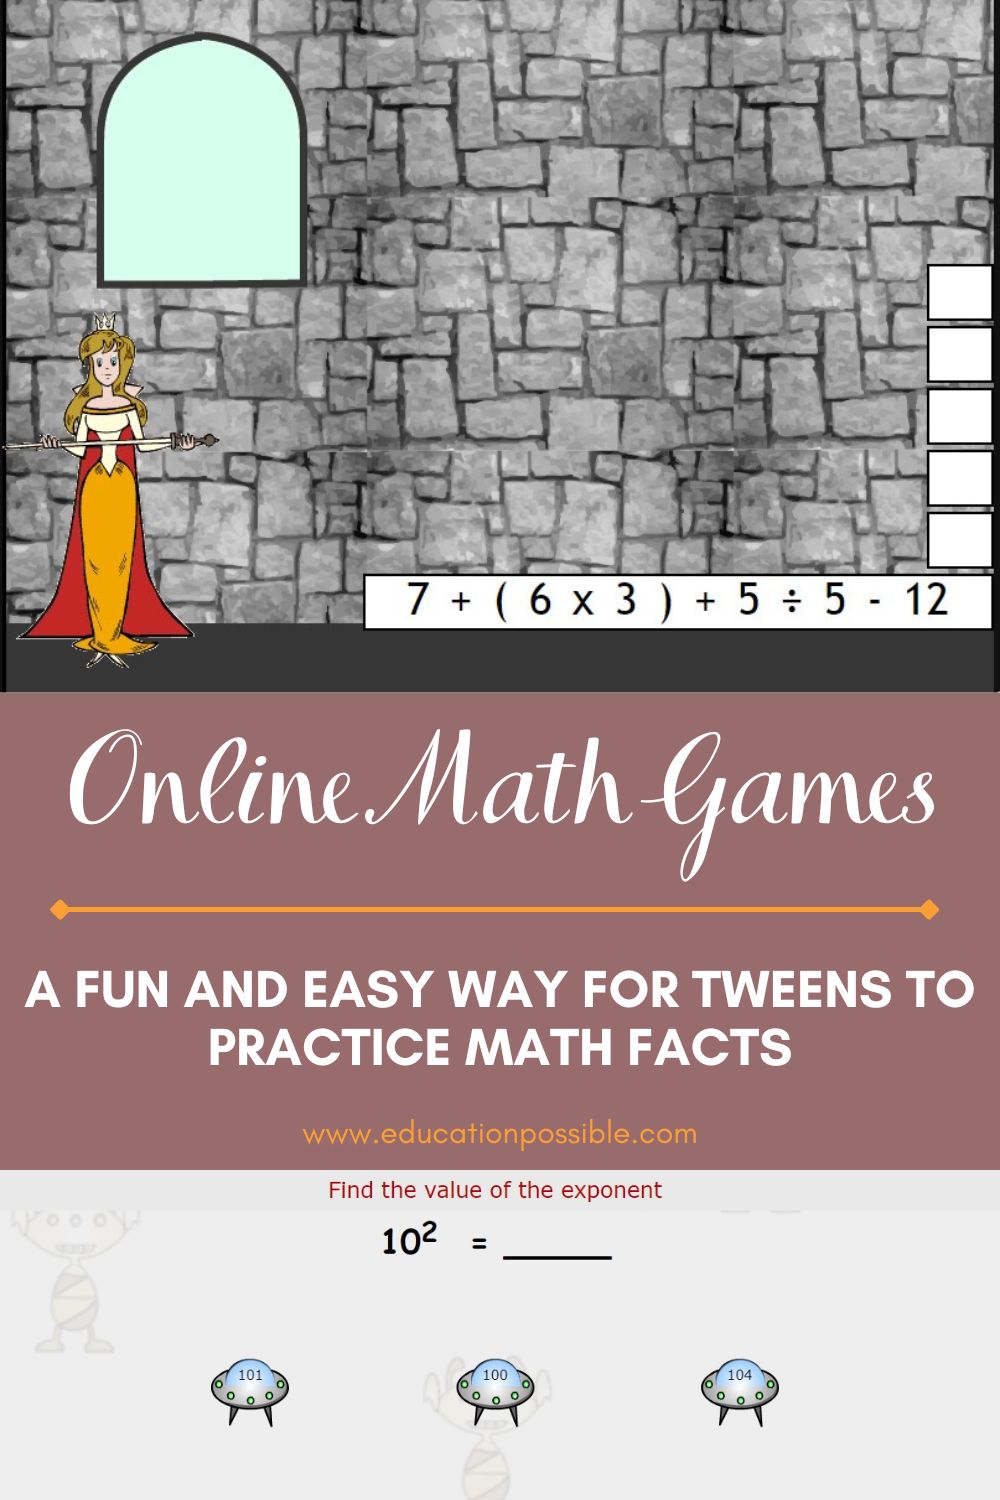 Screenshots of two online math games showing math problems to solve.